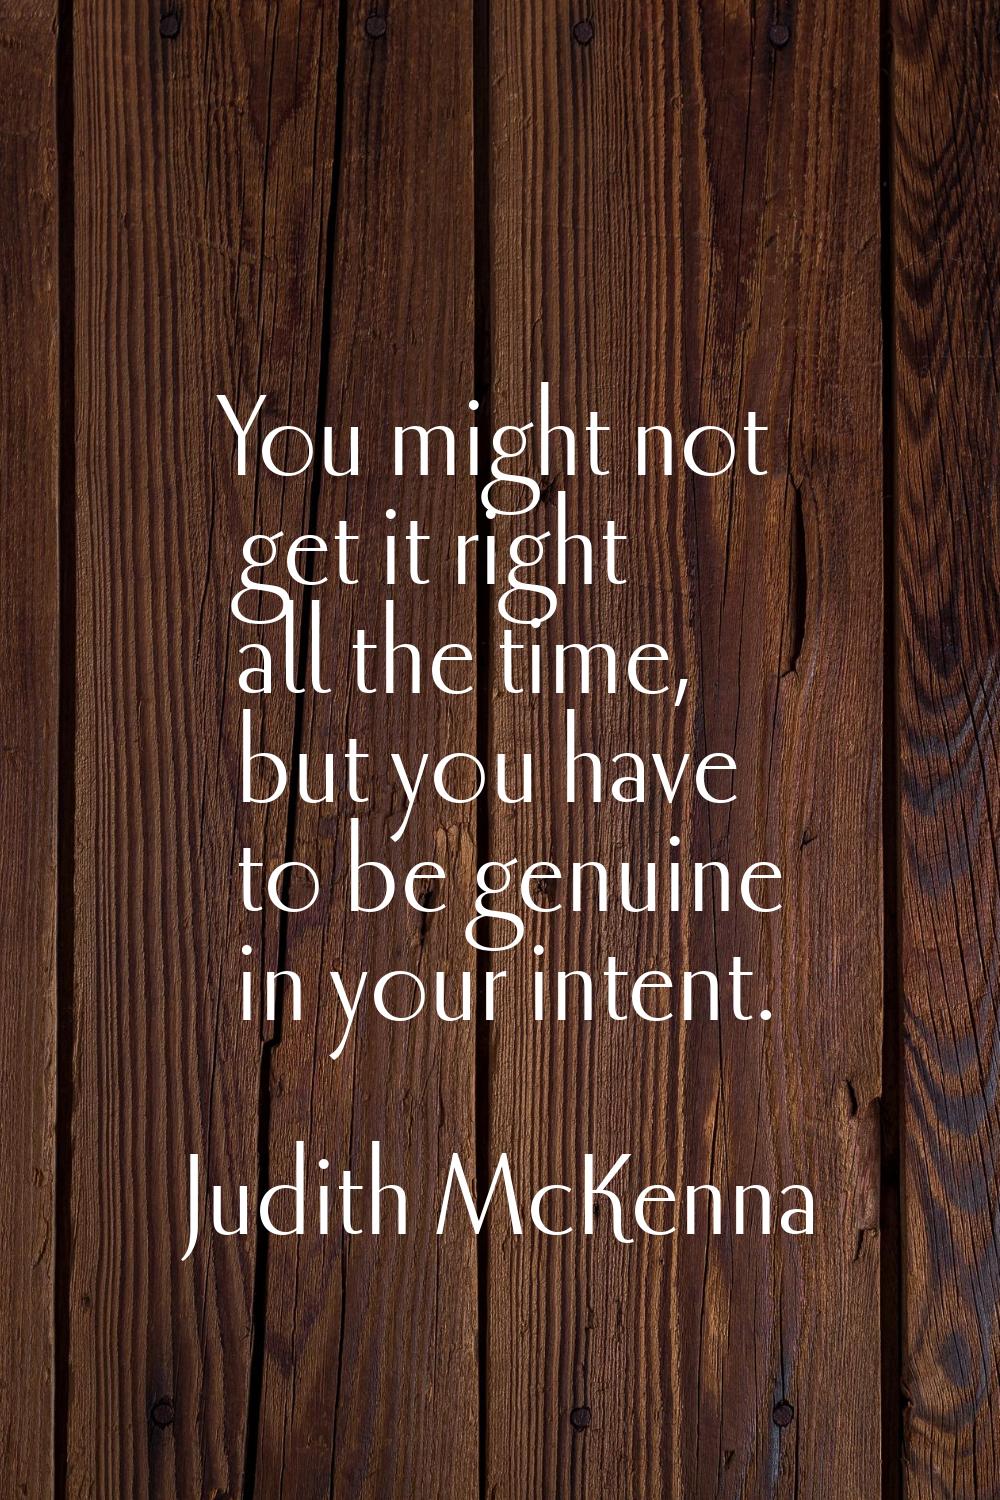 You might not get it right all the time, but you have to be genuine in your intent.